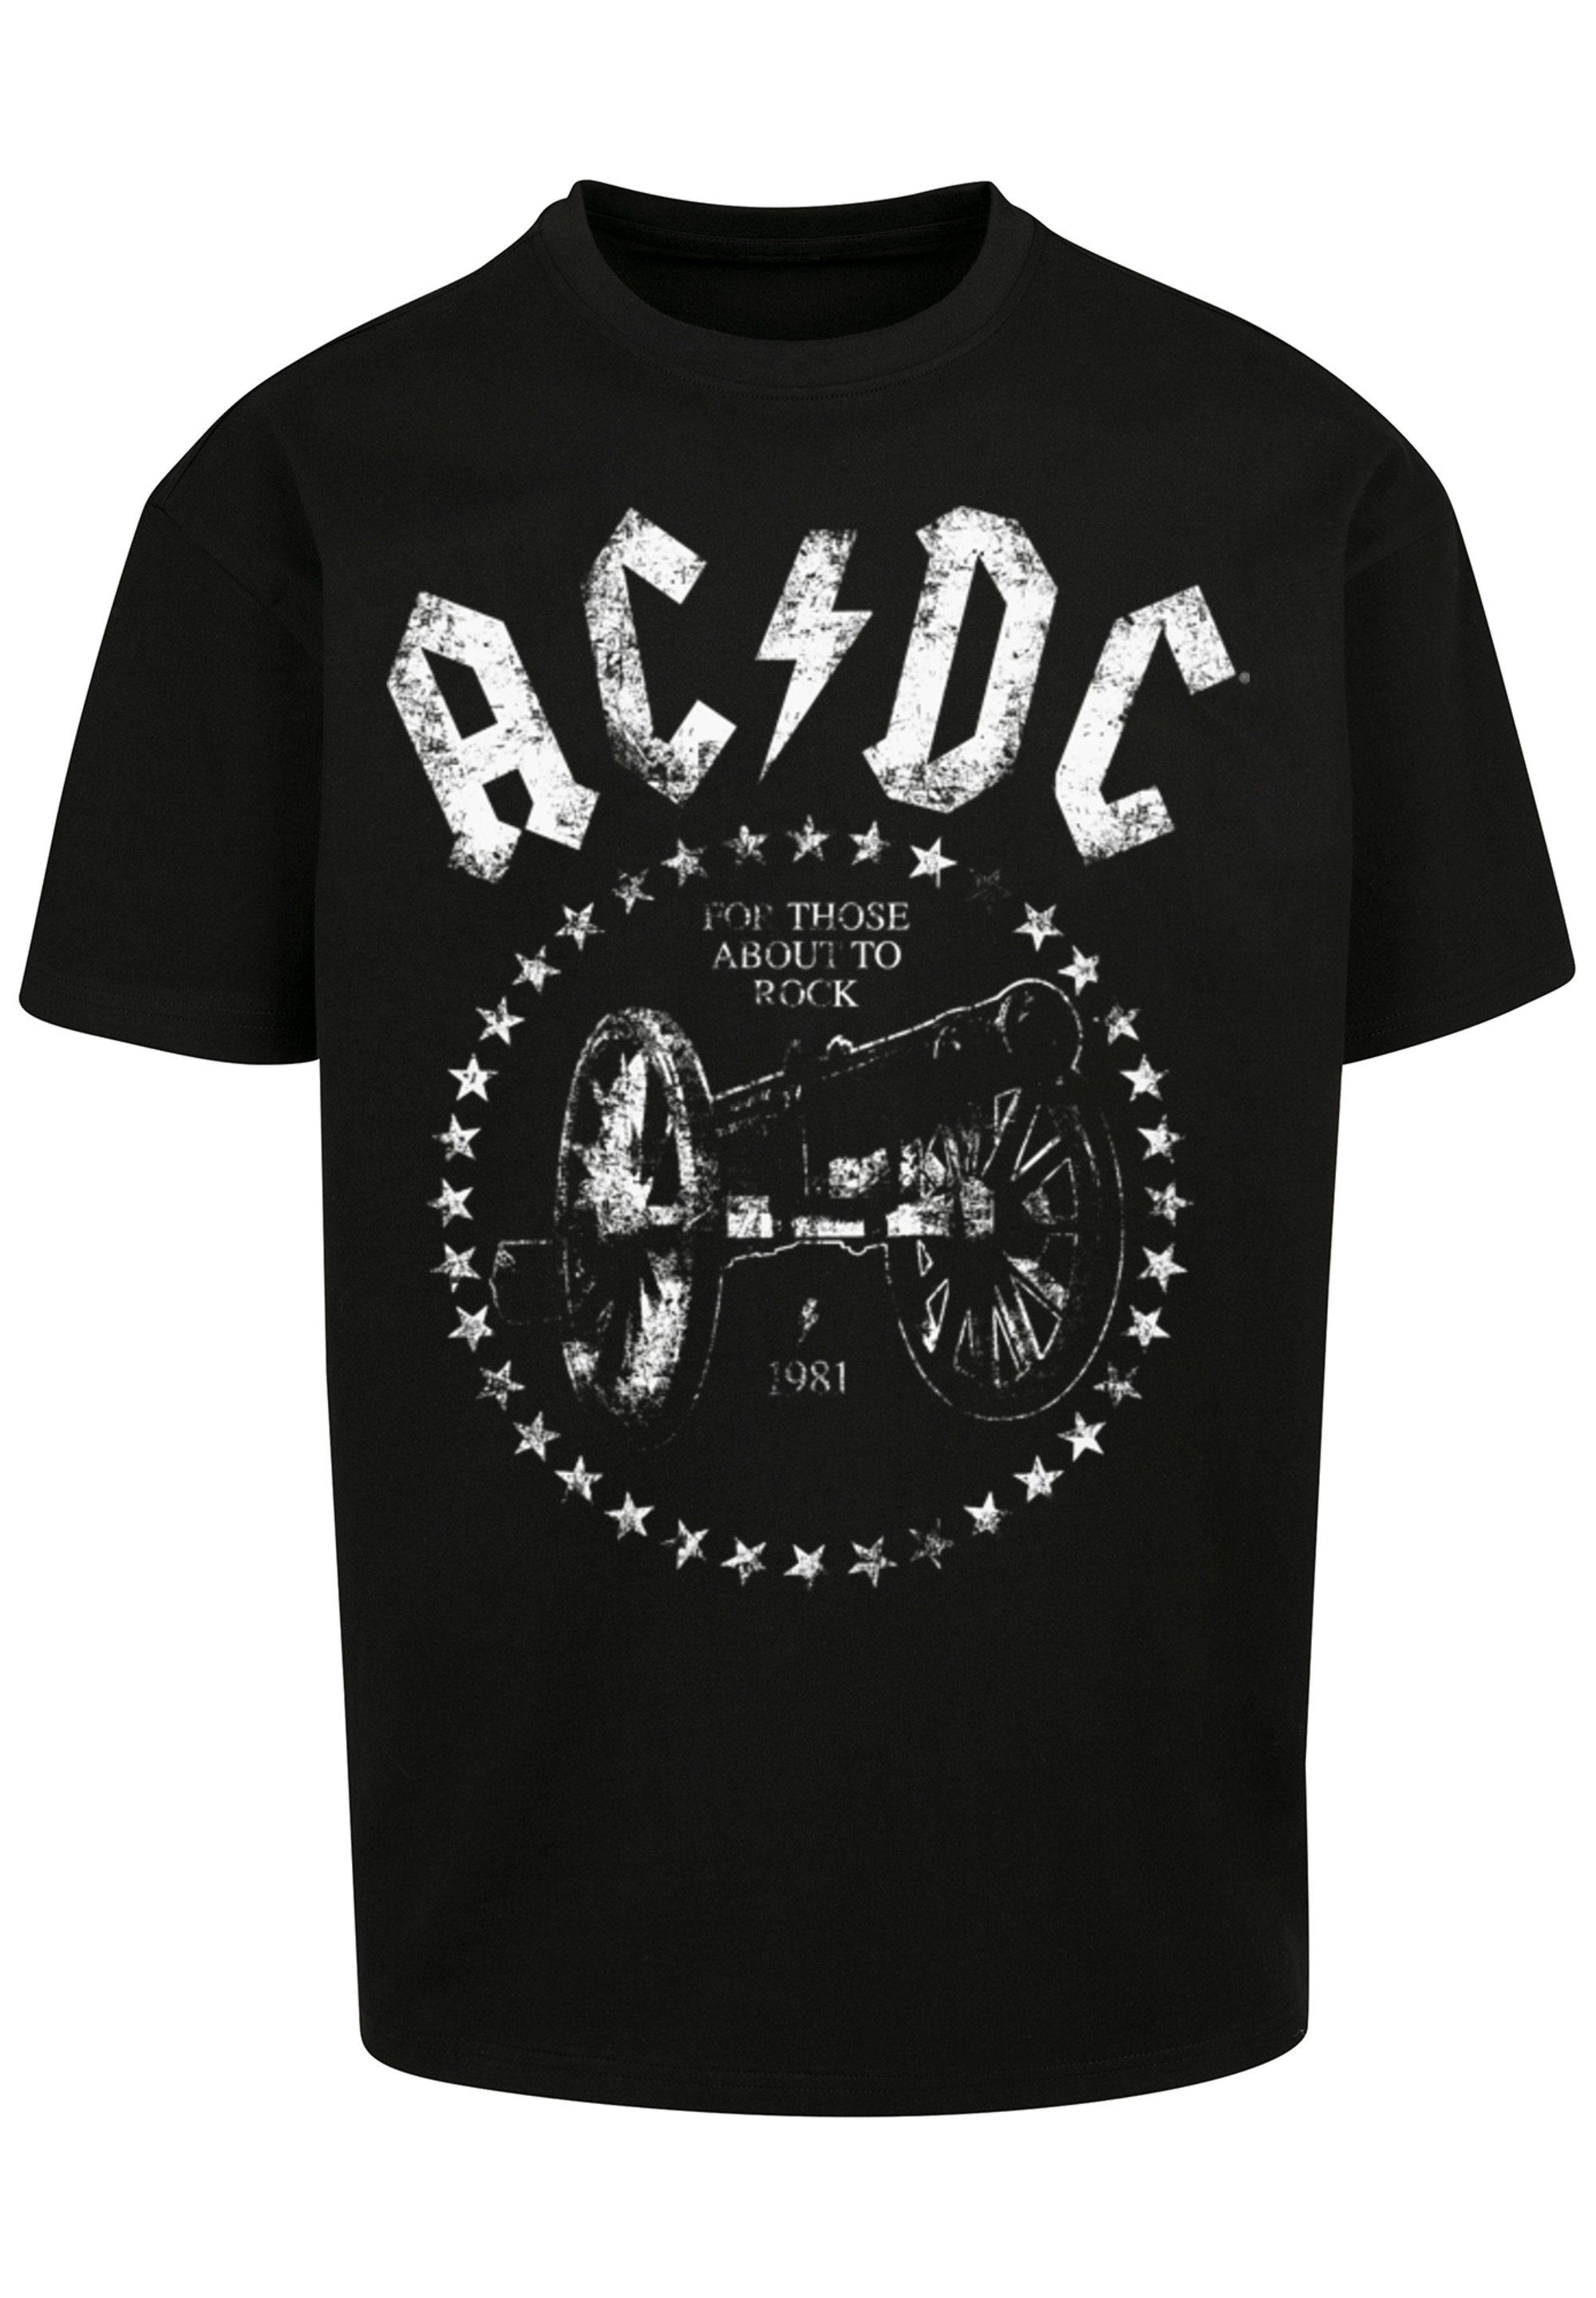 F4NT4STIC T-Shirt ACDC Print You Cannon PLUS Salute SIZE We